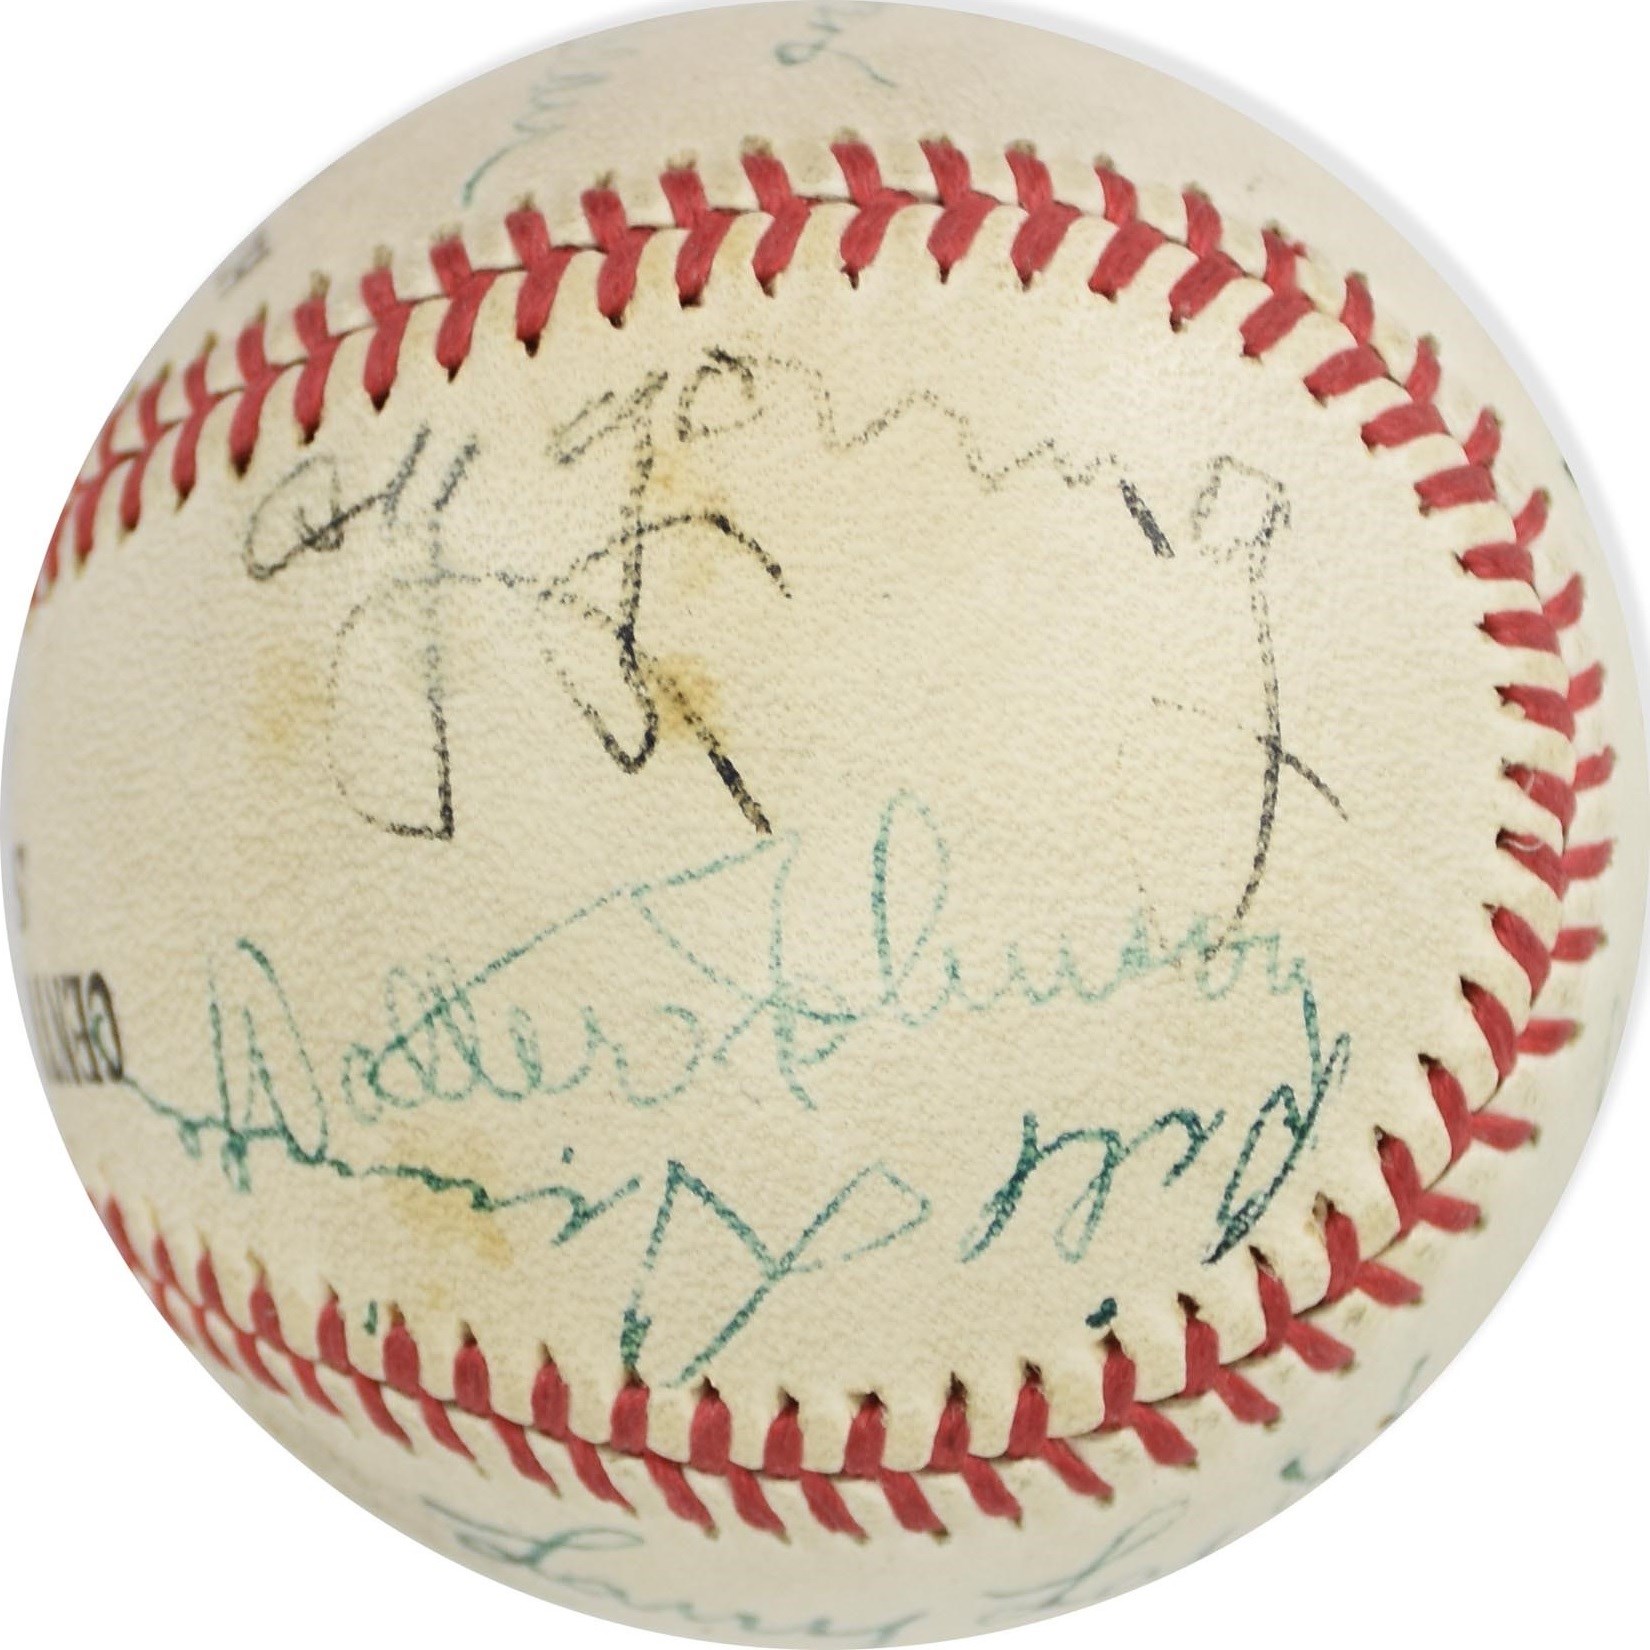 Baseball Autographs - Circa 1939 Hall of Famers Signed Baseball with Five Original Inductees and Johnny Evers (PSA)